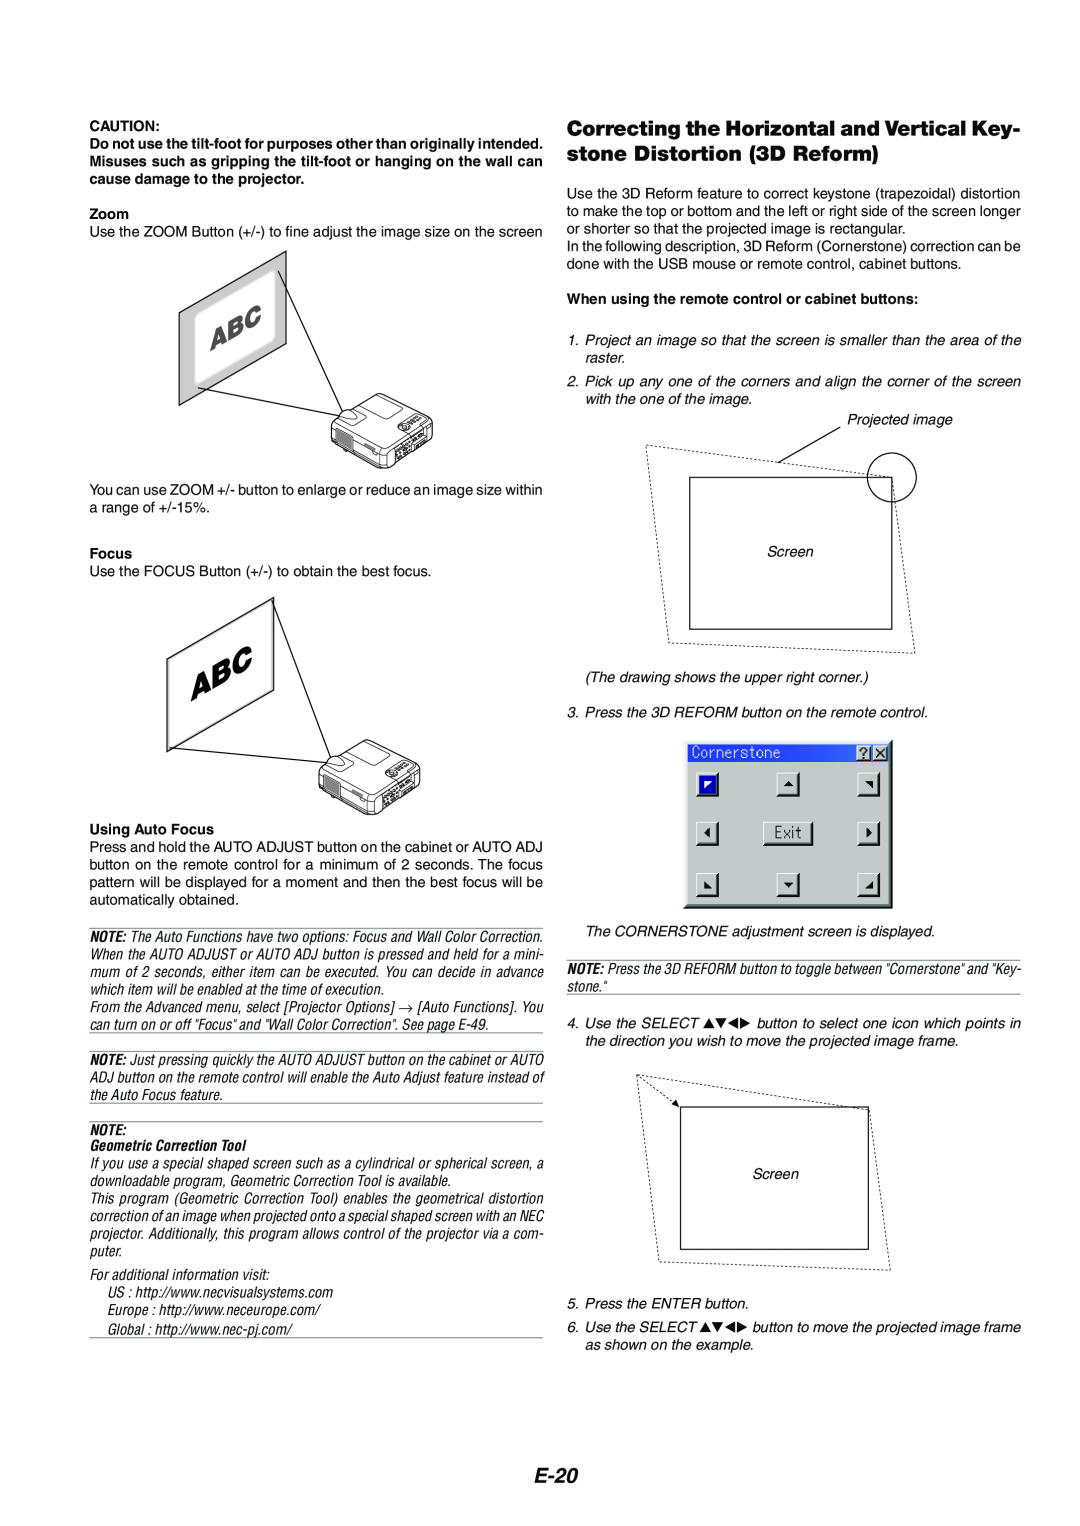 Kensington MT1075, MT1065 user manual E-20, Zoom, When using the remote control or cabinet buttons, Using Auto Focus 